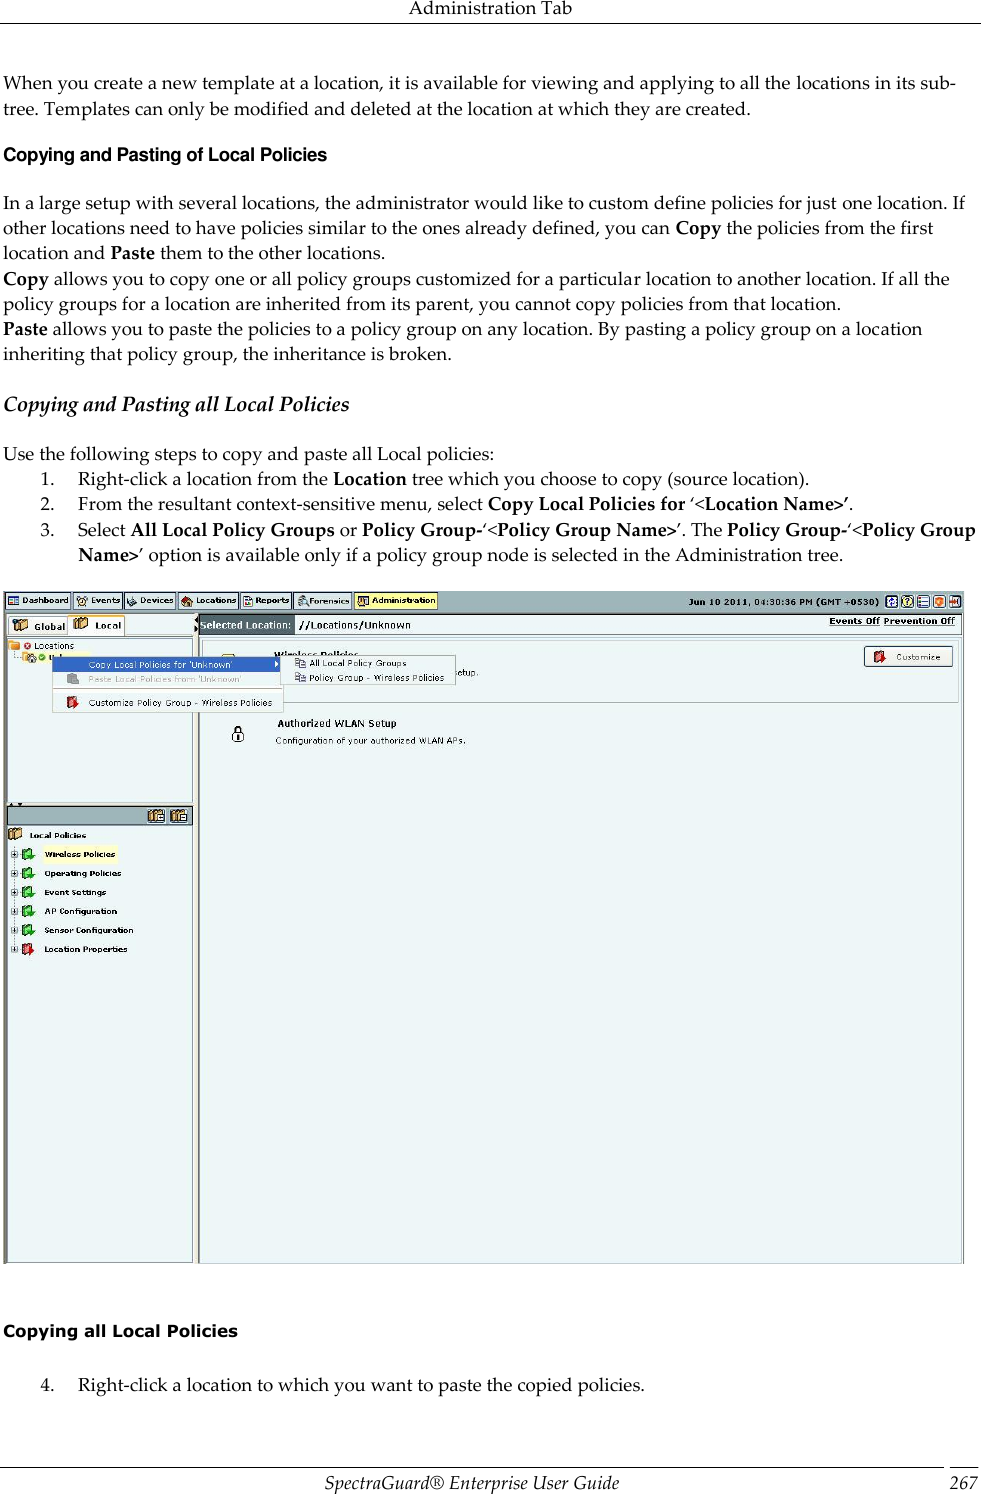 Administration Tab SpectraGuard®  Enterprise User Guide 267 When you create a new template at a location, it is available for viewing and applying to all the locations in its sub-tree. Templates can only be modified and deleted at the location at which they are created. Copying and Pasting of Local Policies In a large setup with several locations, the administrator would like to custom define policies for just one location. If other locations need to have policies similar to the ones already defined, you can Copy the policies from the first location and Paste them to the other locations. Copy allows you to copy one or all policy groups customized for a particular location to another location. If all the policy groups for a location are inherited from its parent, you cannot copy policies from that location. Paste allows you to paste the policies to a policy group on any location. By pasting a policy group on a location inheriting that policy group, the inheritance is broken. Copying and Pasting all Local Policies Use the following steps to copy and paste all Local policies: 1. Right-click a location from the Location tree which you choose to copy (source location). 2. From the resultant context-sensitive menu, select Copy Local Policies for ‘&lt;Location Name&gt;’. 3. Select All Local Policy Groups or Policy Group-‘&lt;Policy Group Name&gt;’. The Policy Group-‘&lt;Policy Group Name&gt;’ option is available only if a policy group node is selected in the Administration tree.        Copying all Local Policies   4. Right-click a location to which you want to paste the copied policies. 